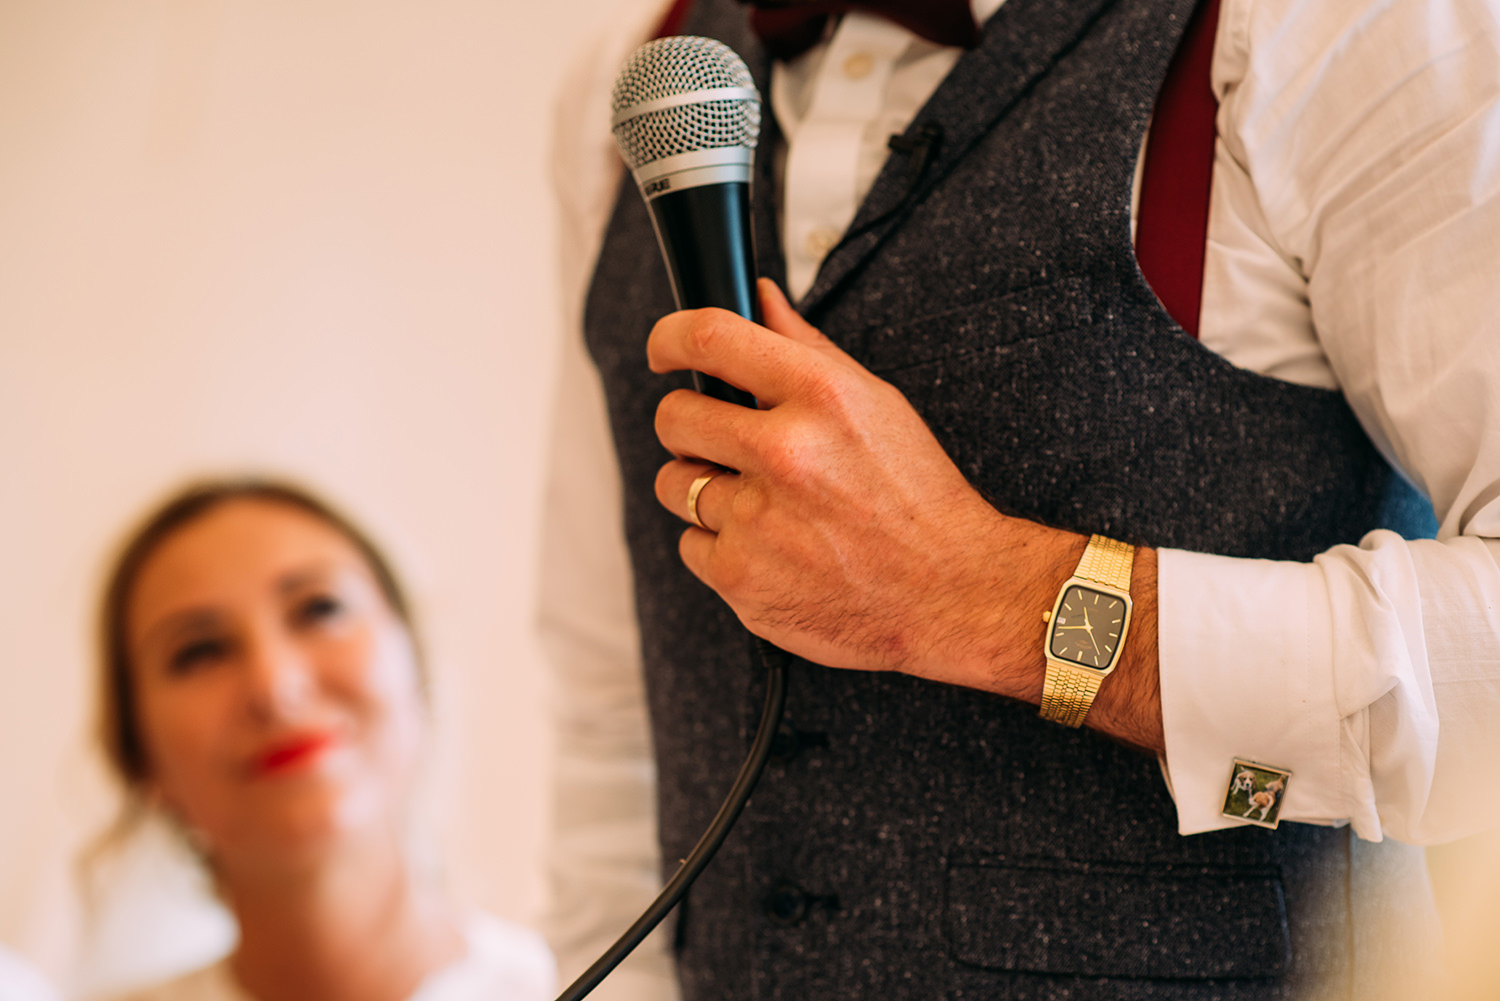  detail of grooms watch and microphone during the speeech with bride looking on in the background 